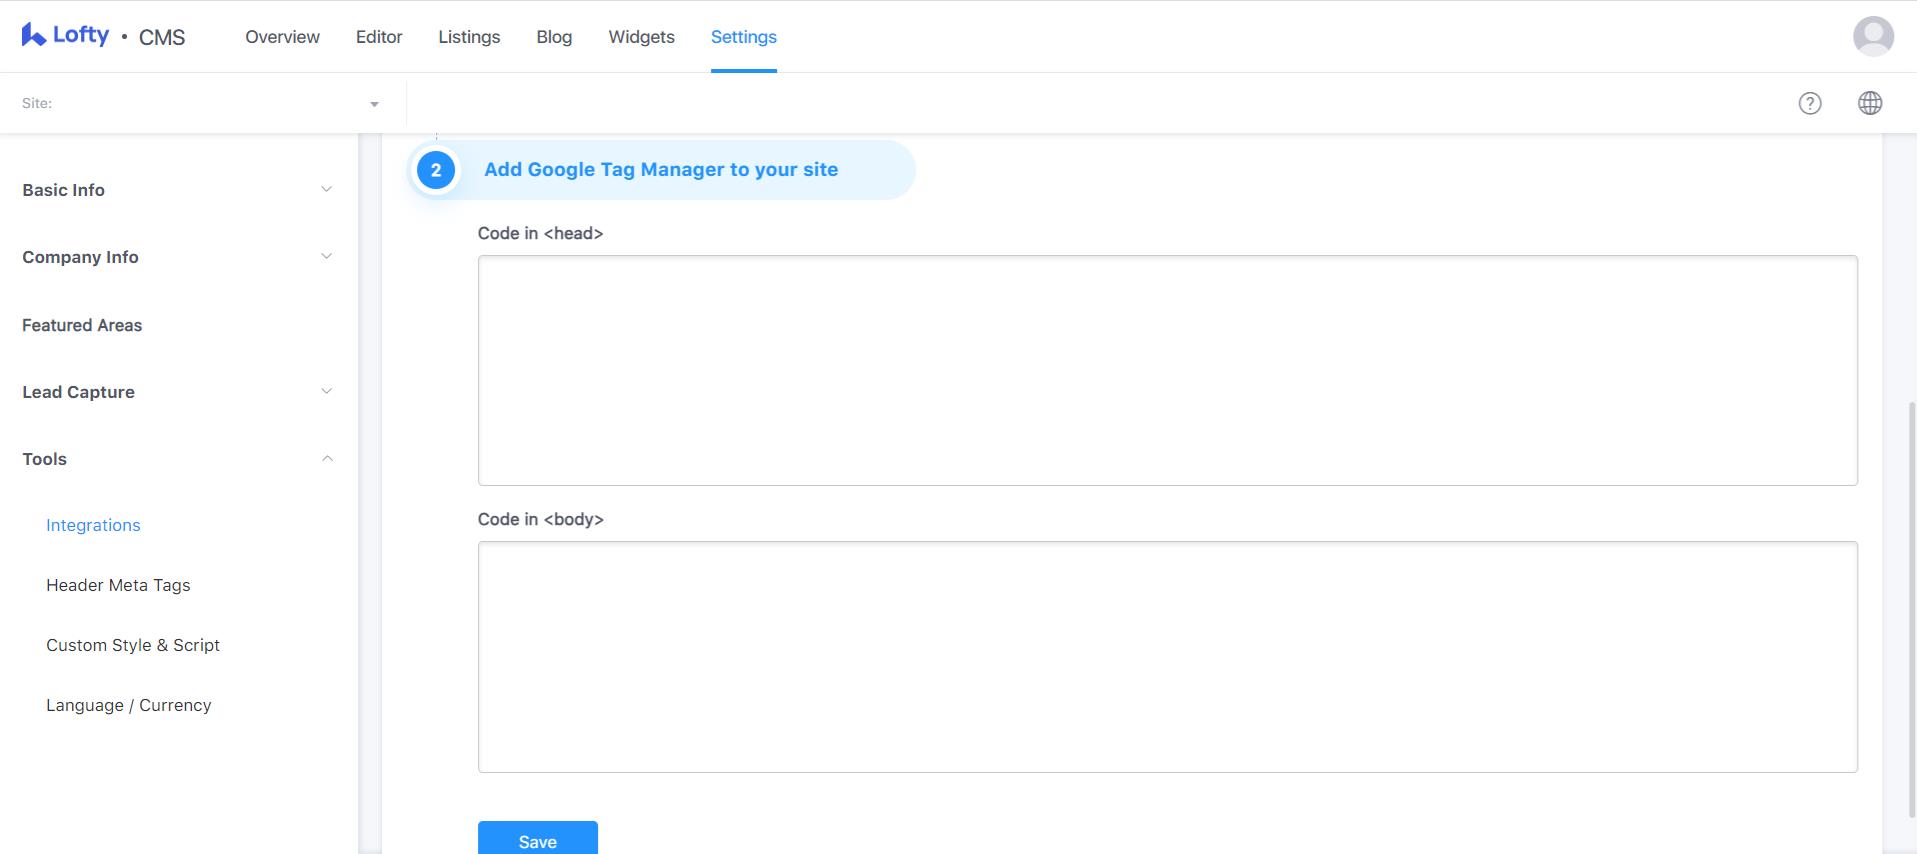 cms add google tag manager to your site.jpeg